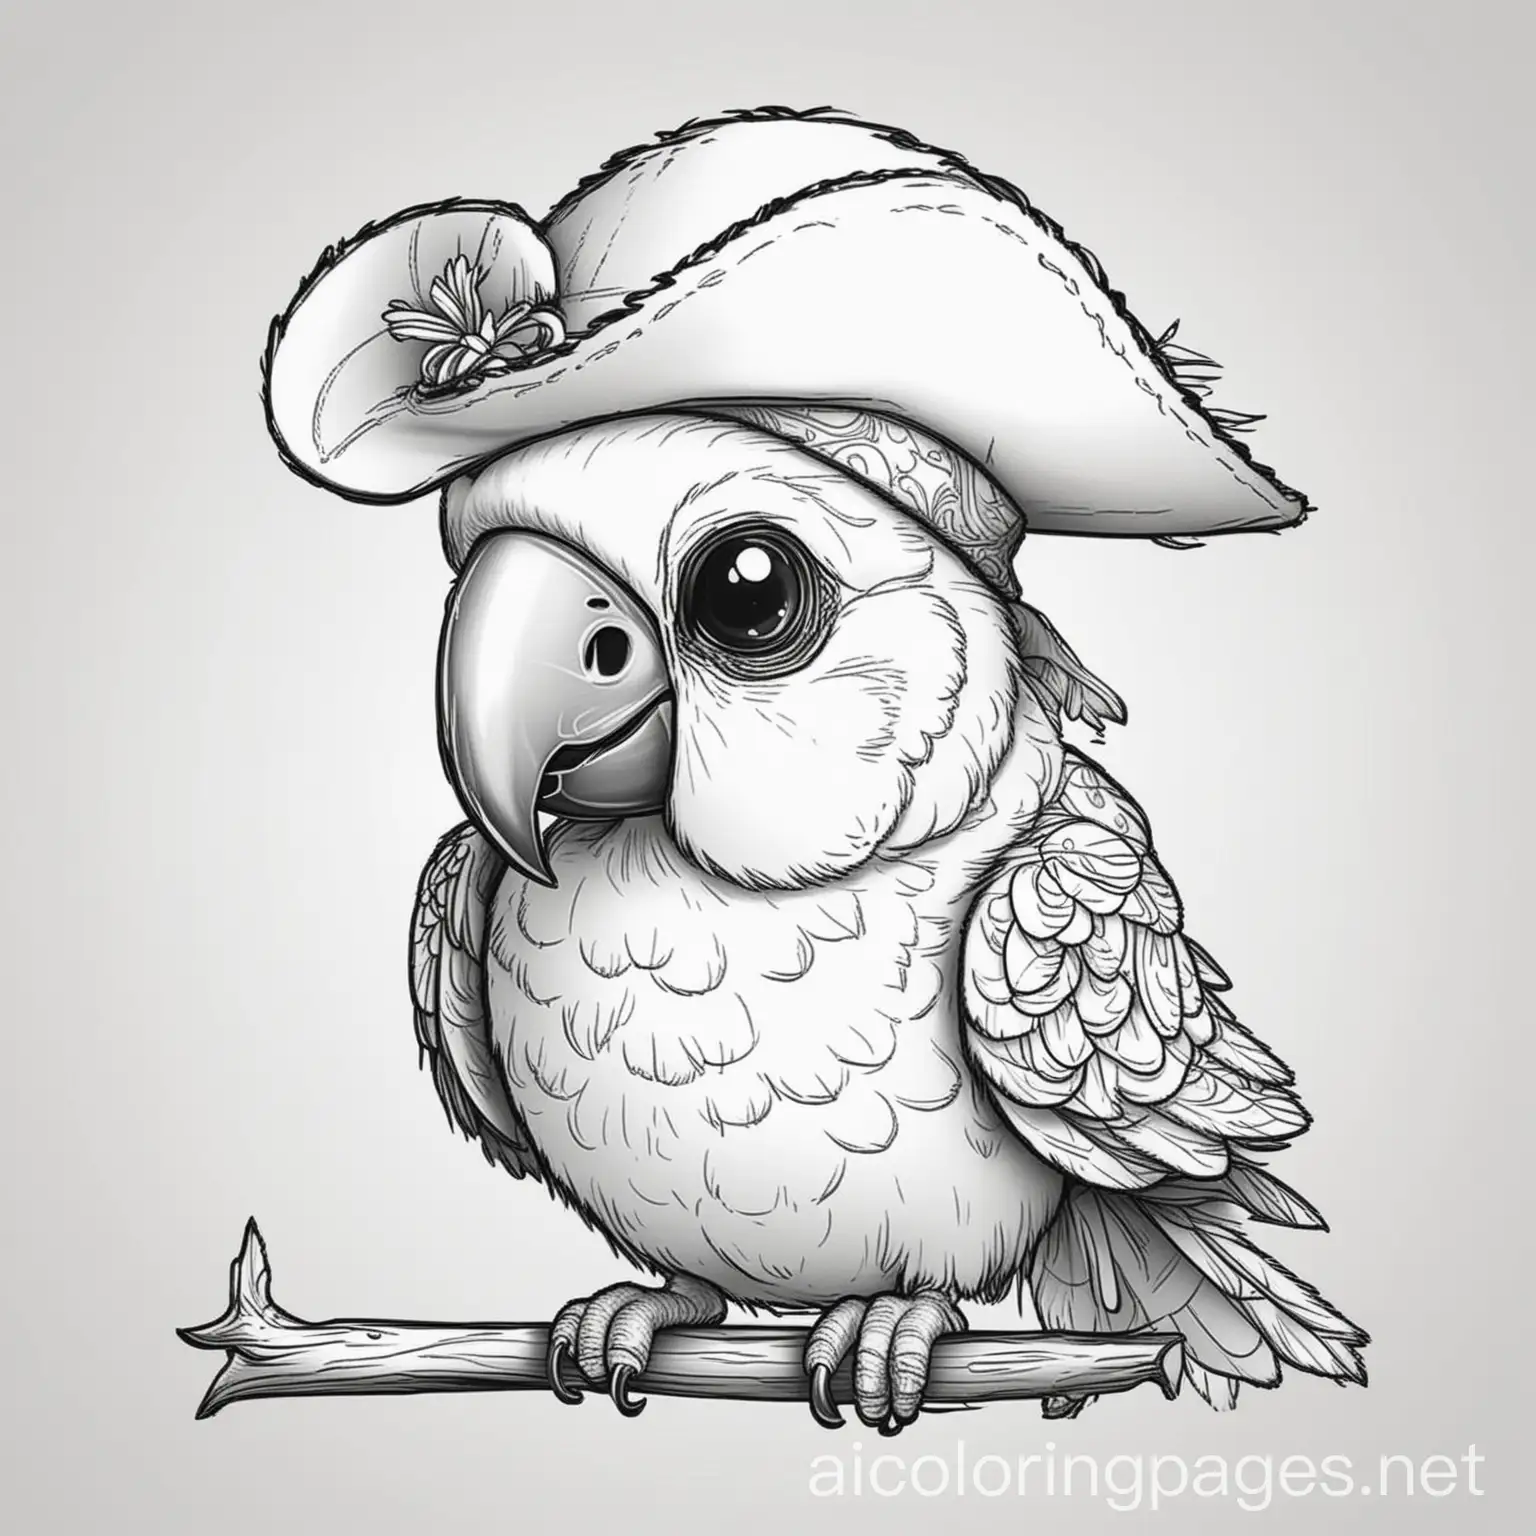 Cute Parrot with a Tiny Pirate Hat
, Coloring Page, black and white, line art, white background, Simplicity, Ample White Space. The background of the coloring page is plain white to make it easy for young children to color within the lines. The outlines of all the subjects are easy to distinguish, making it simple for kids to color without too much difficulty